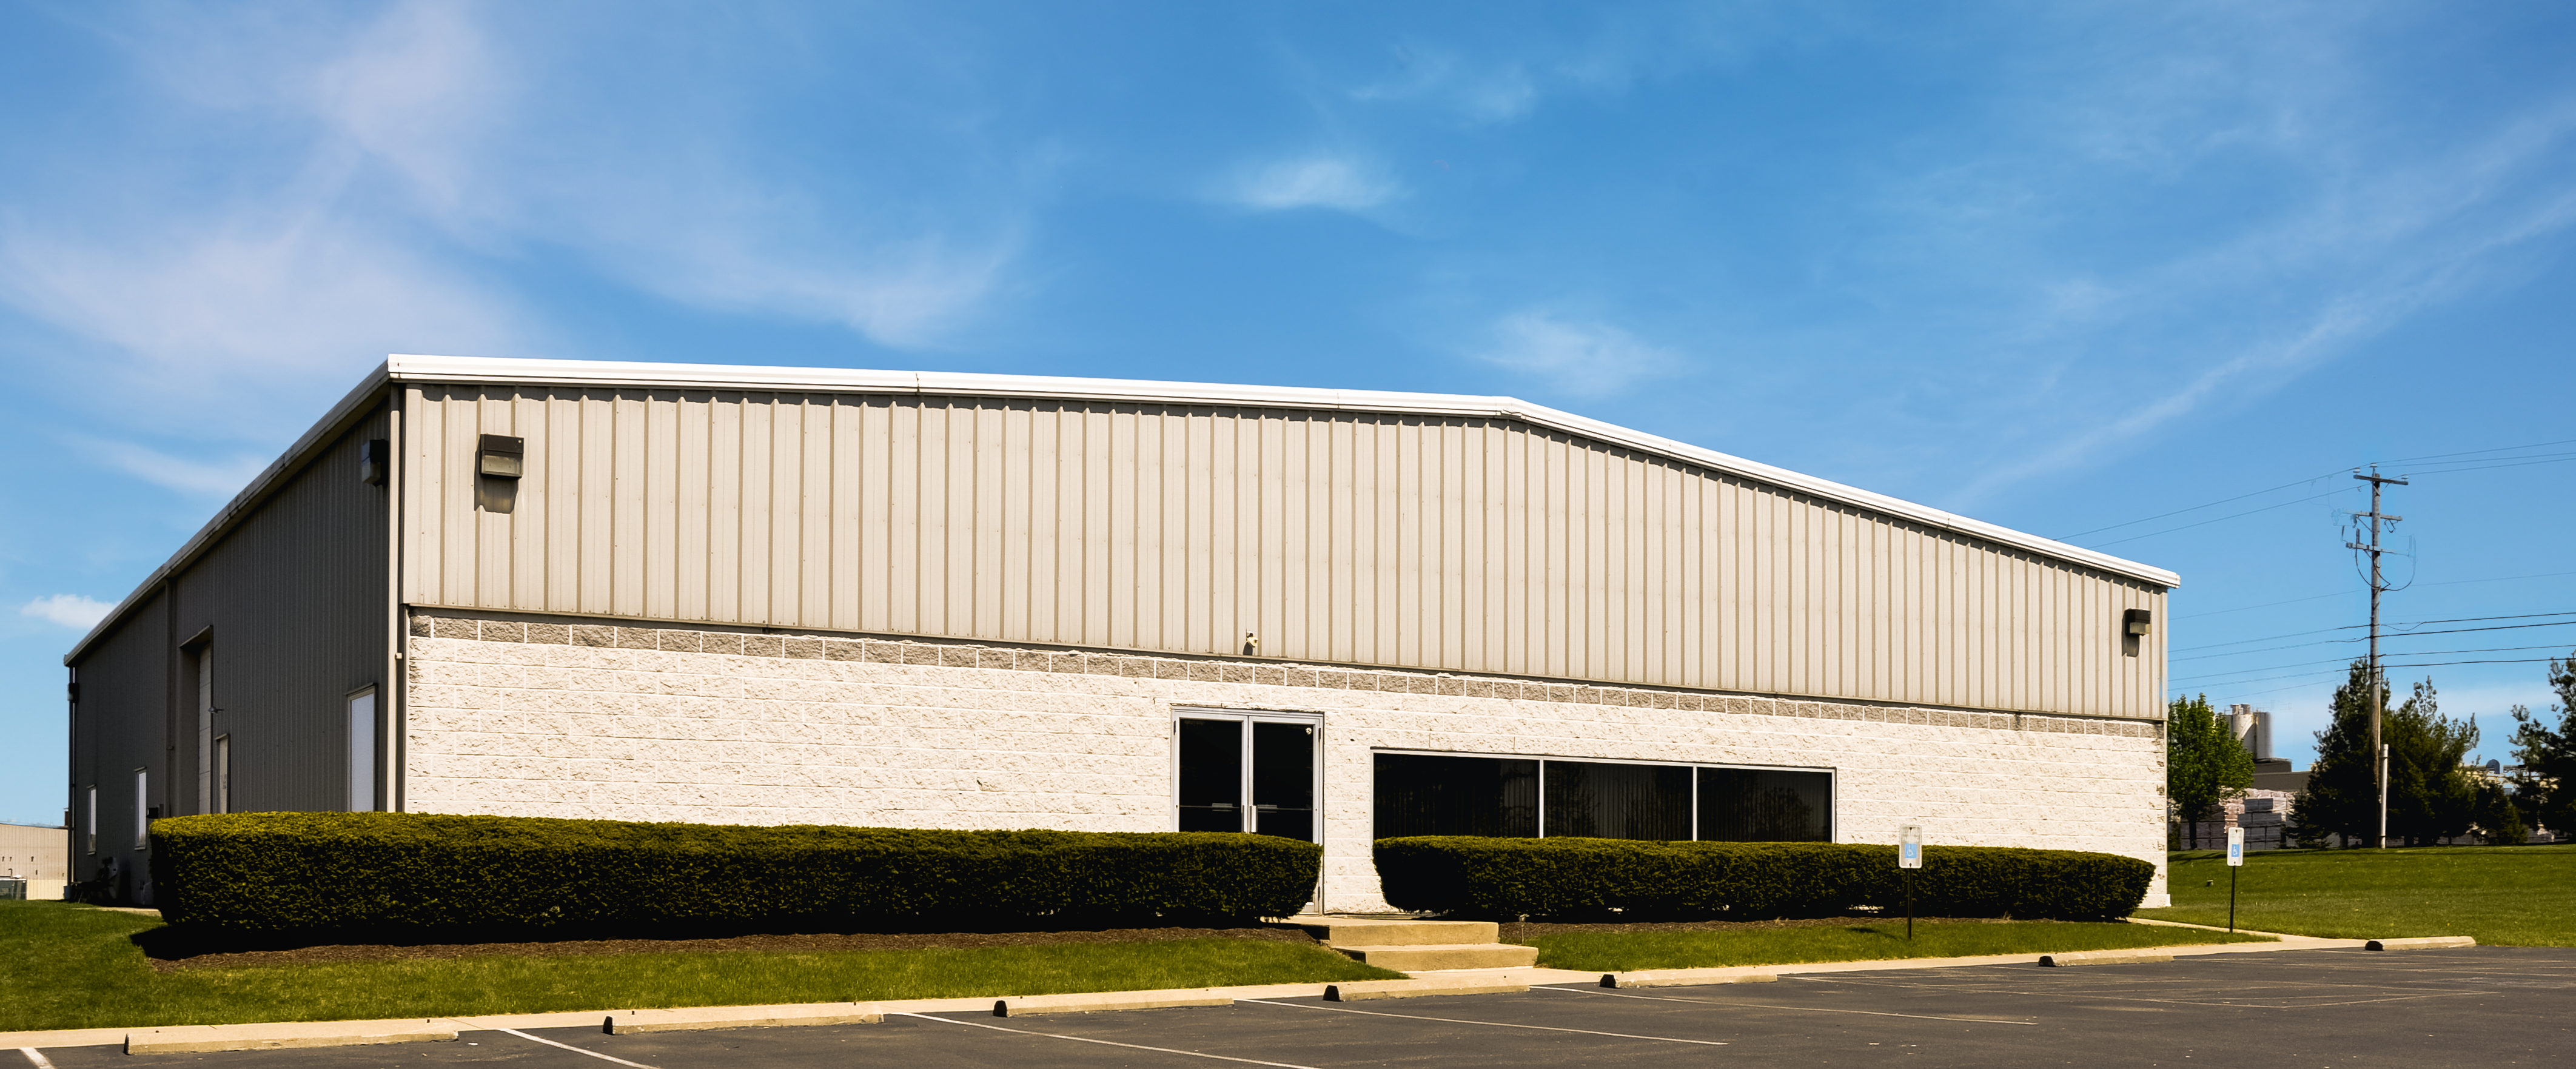 Prefabricated Steel Commercial Building Services